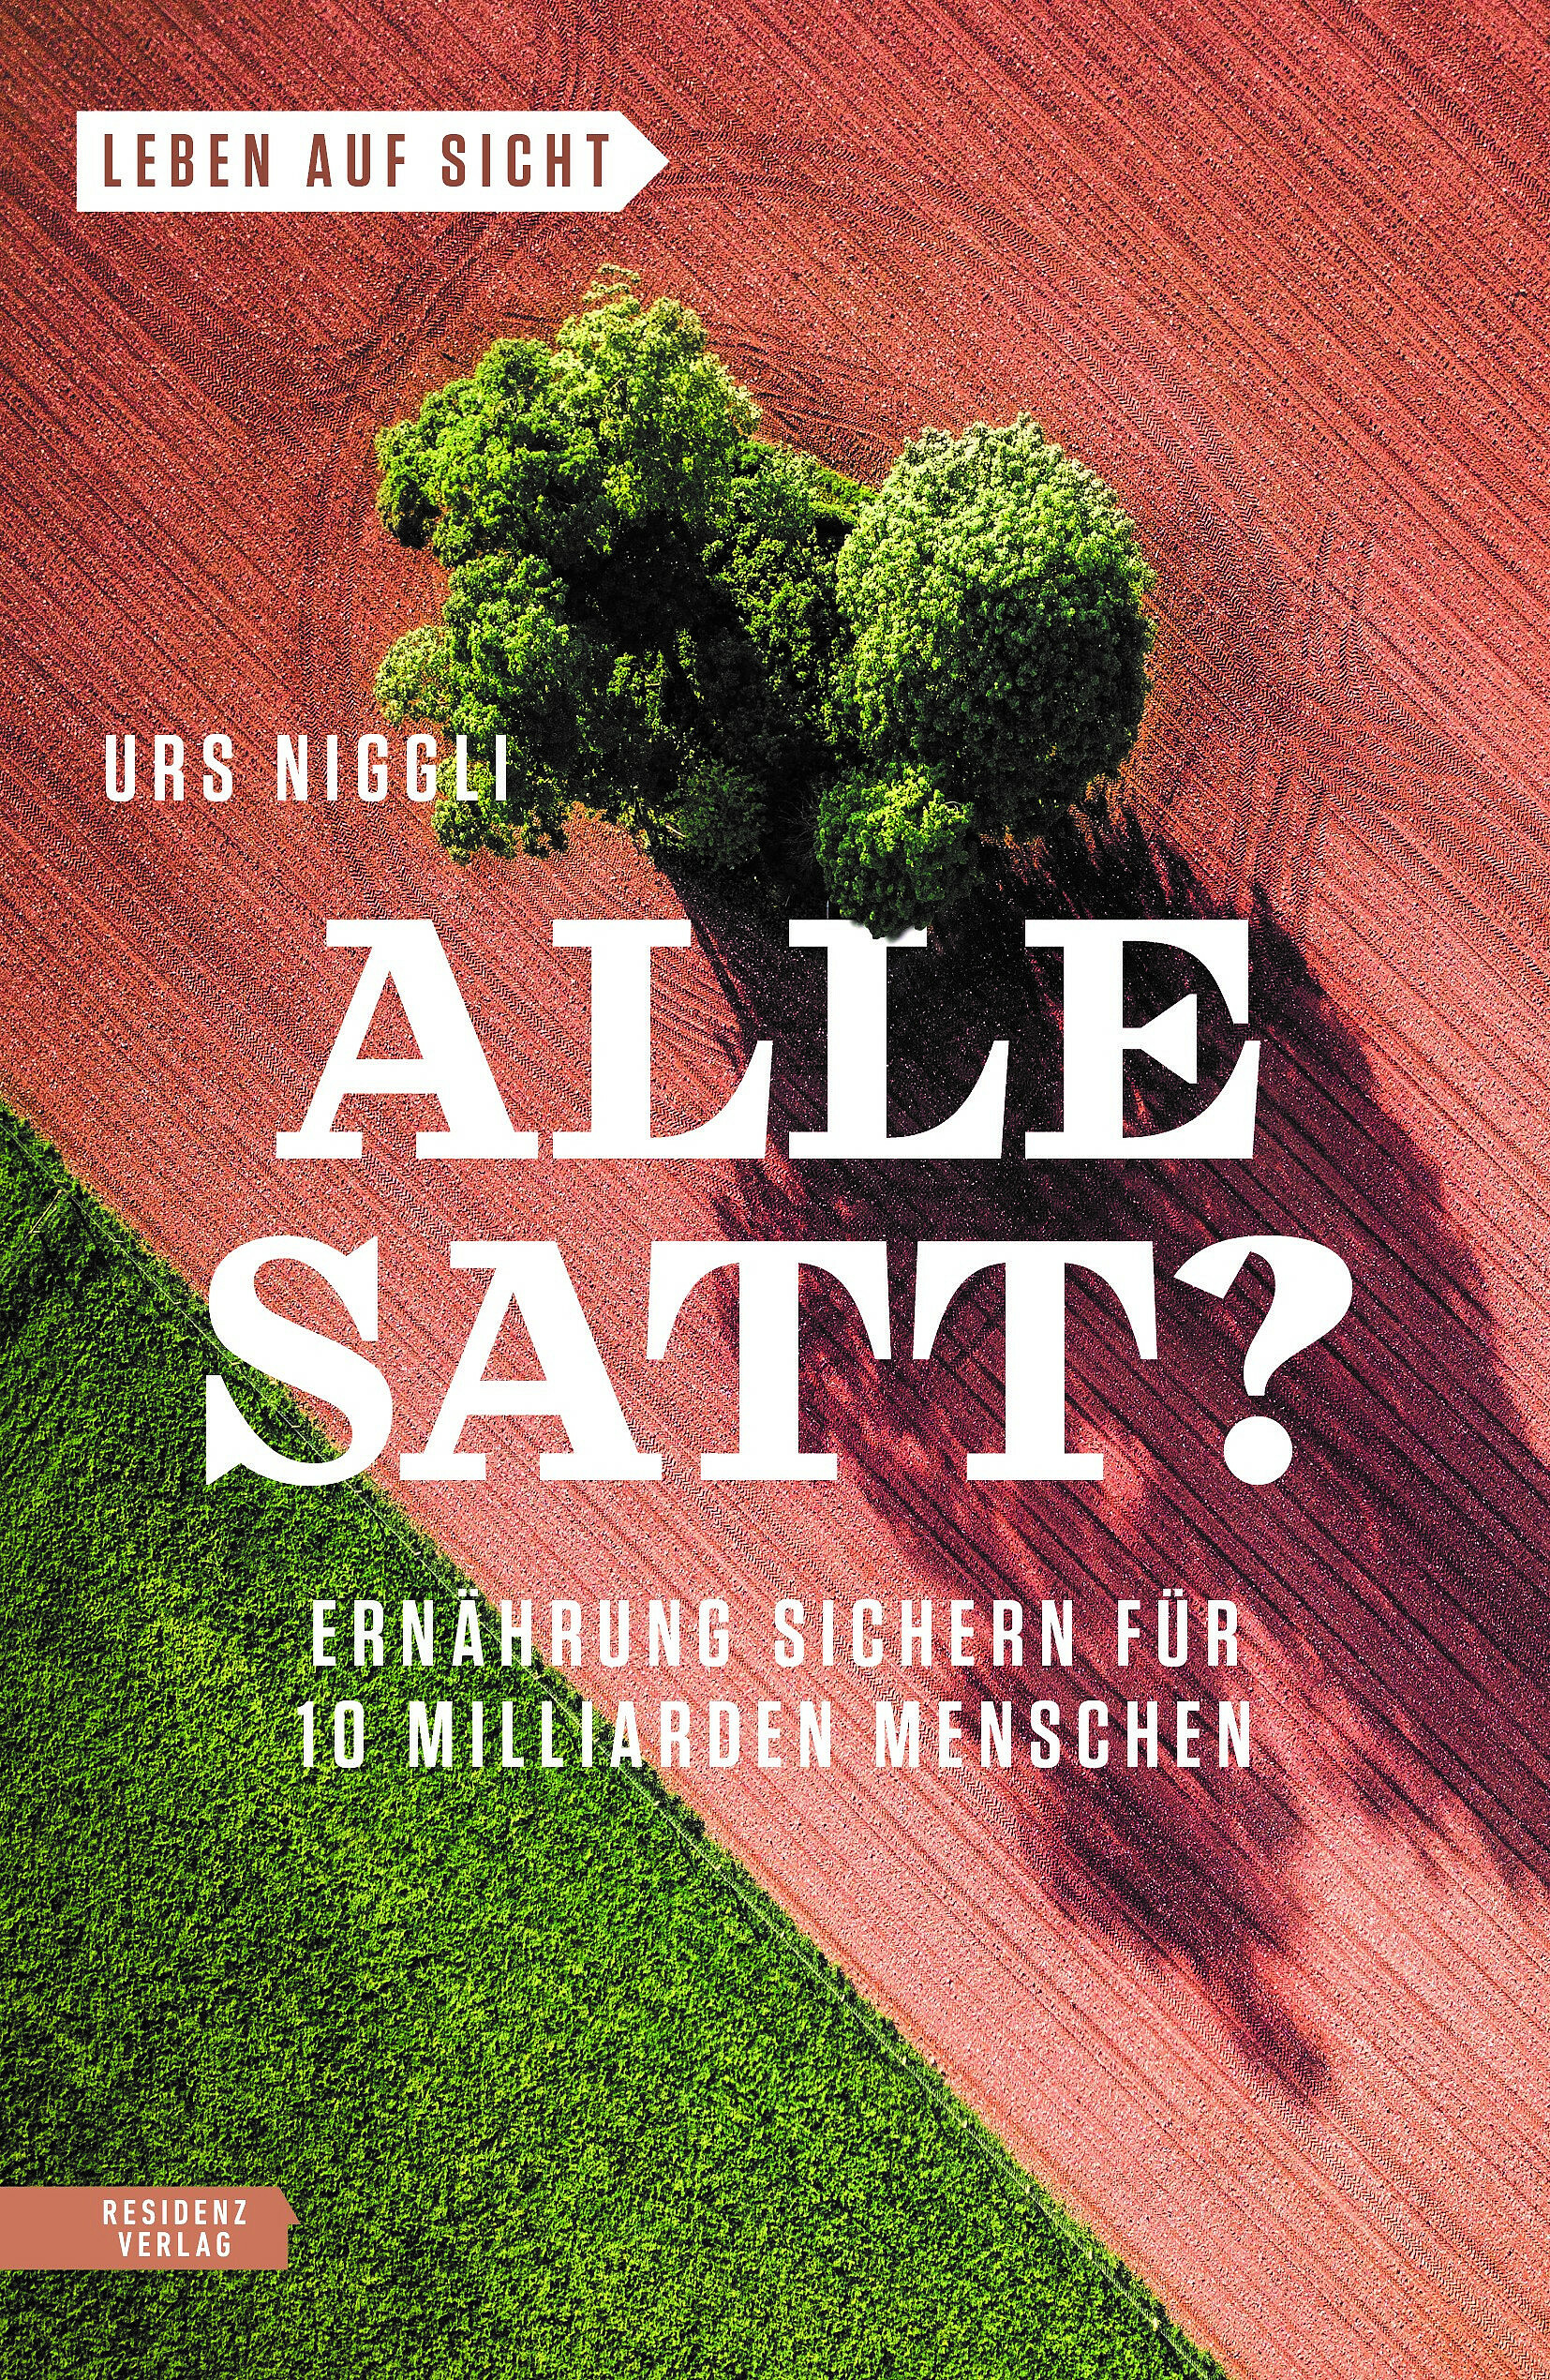 Review of the book "Alle Satt?"  Spectrum of Science